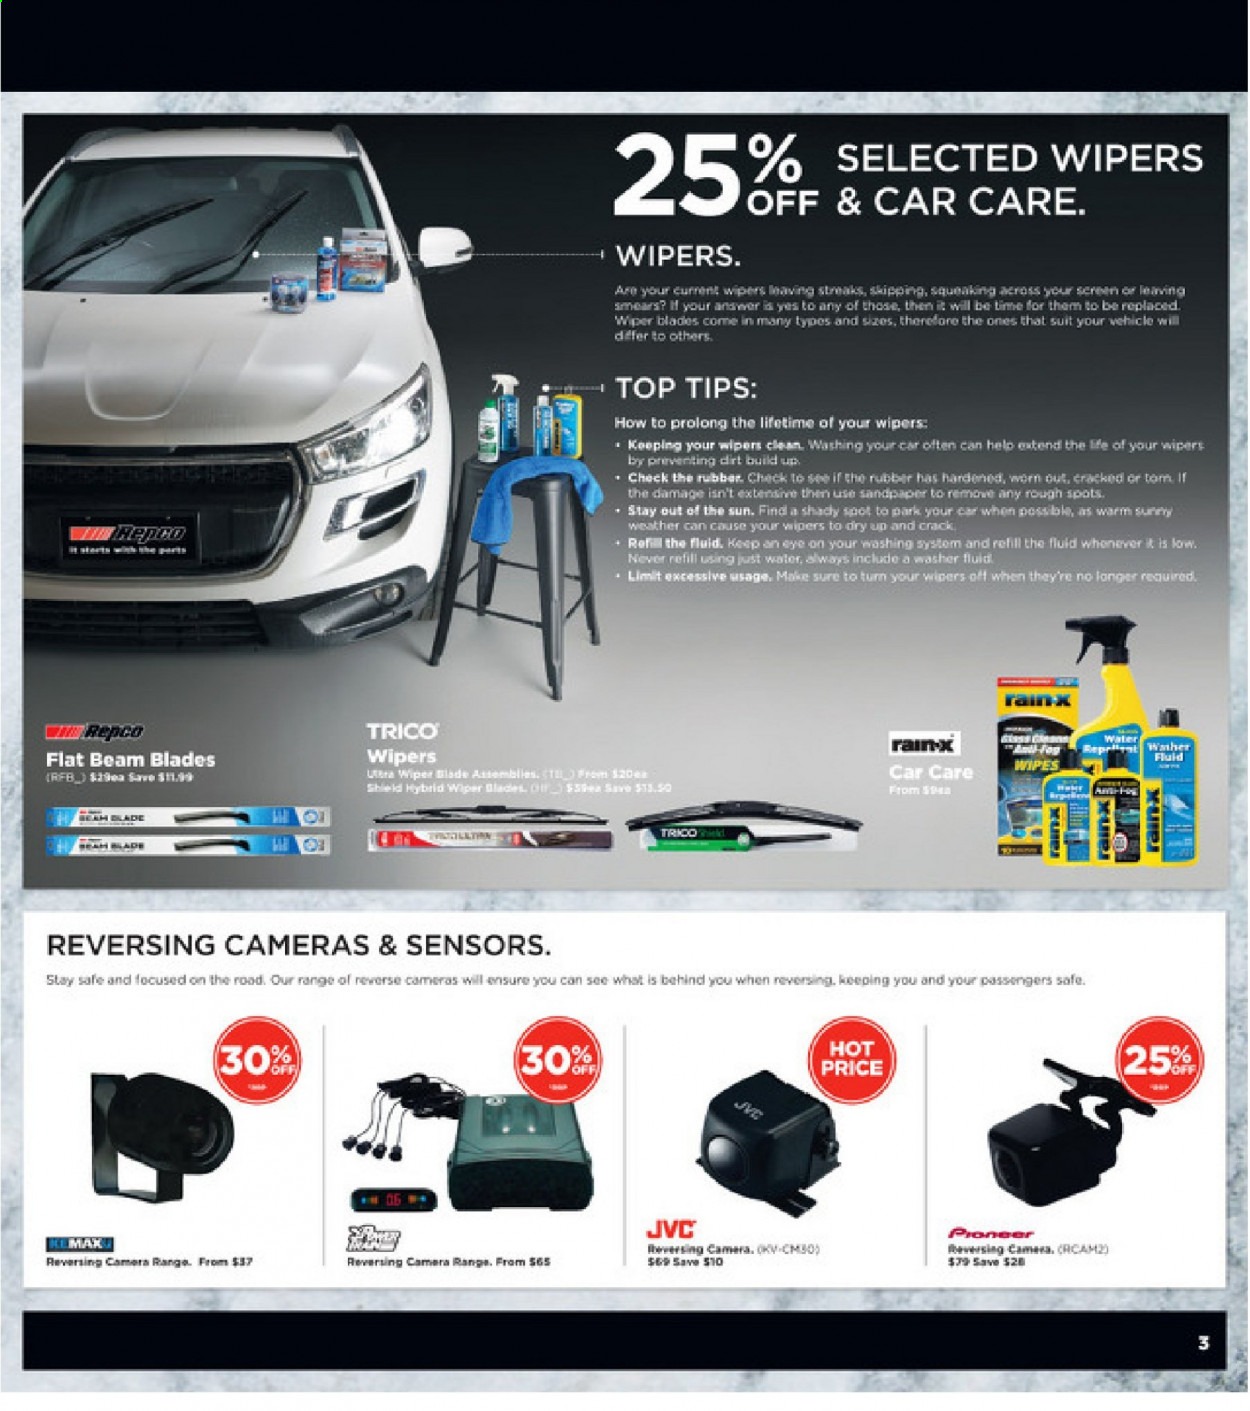 thumbnail - Repco mailer - 12.05.2021 - 25.05.2021 - Sales products - wiper blades, reversing camera, washer fluid. Page 3.